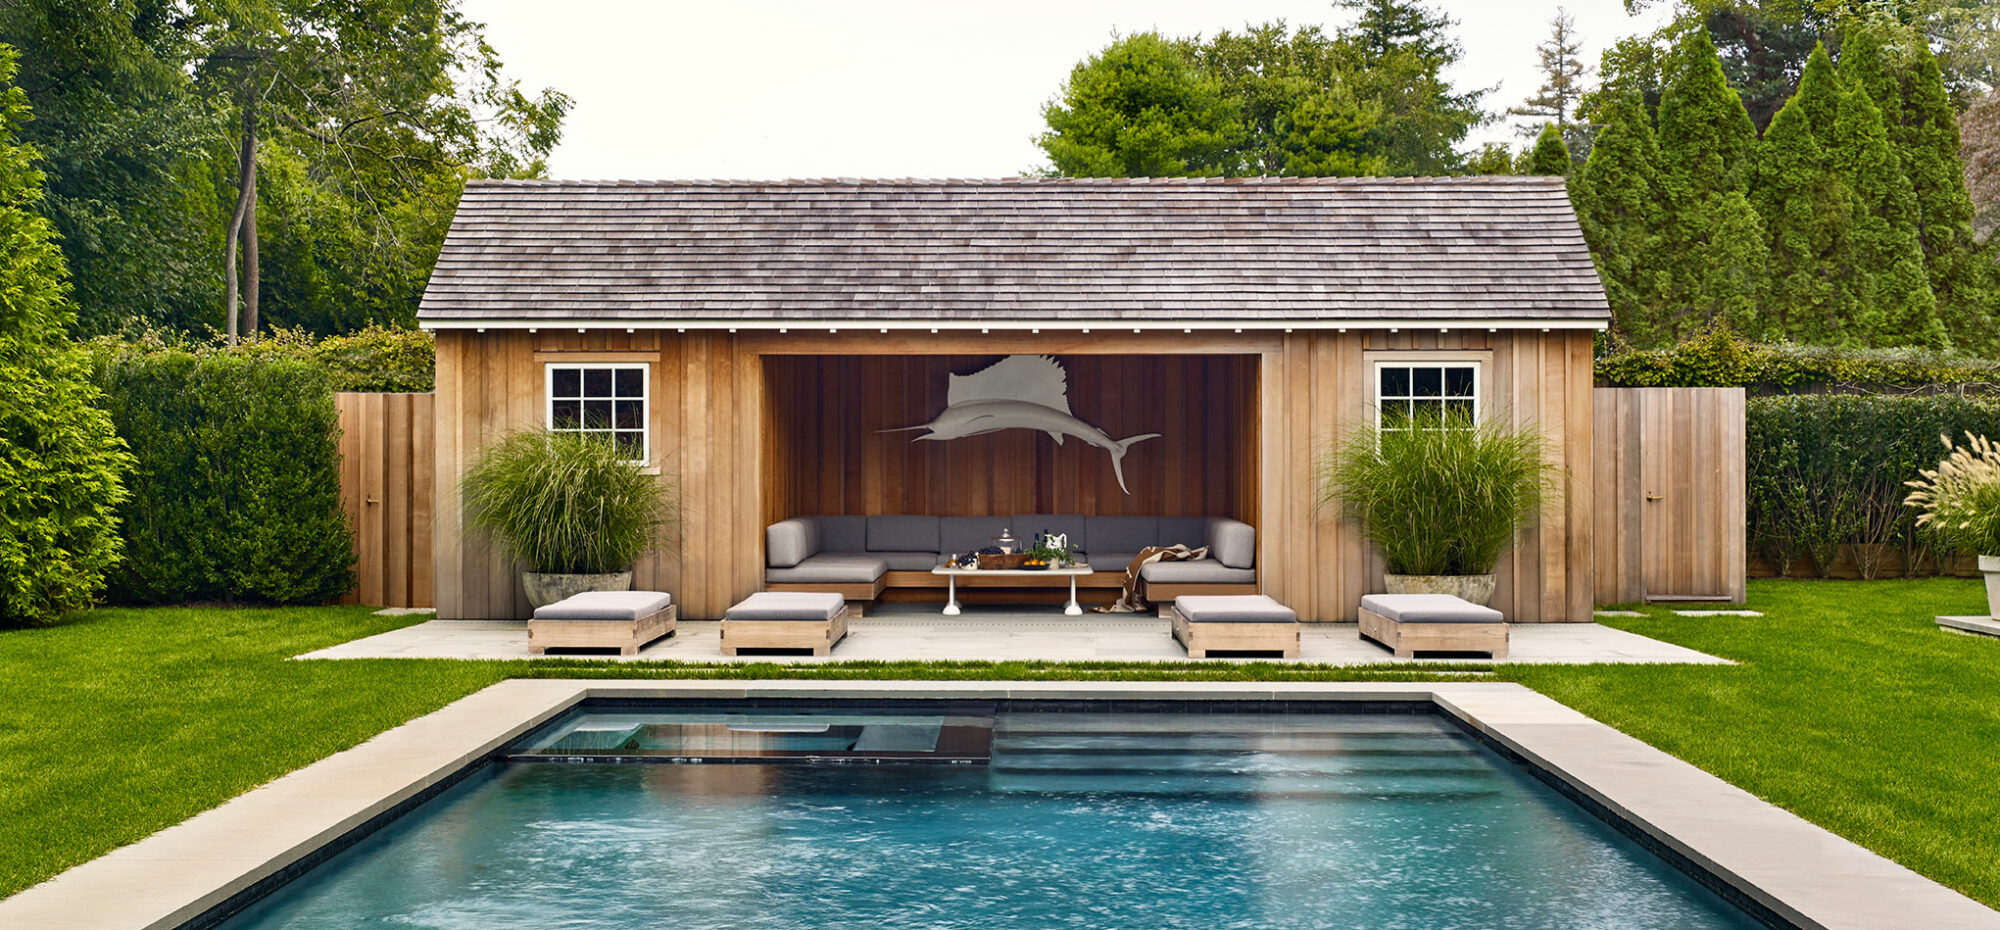 A rustic and classic Hamptons pool house with built-in banquette for entertaining outdoors